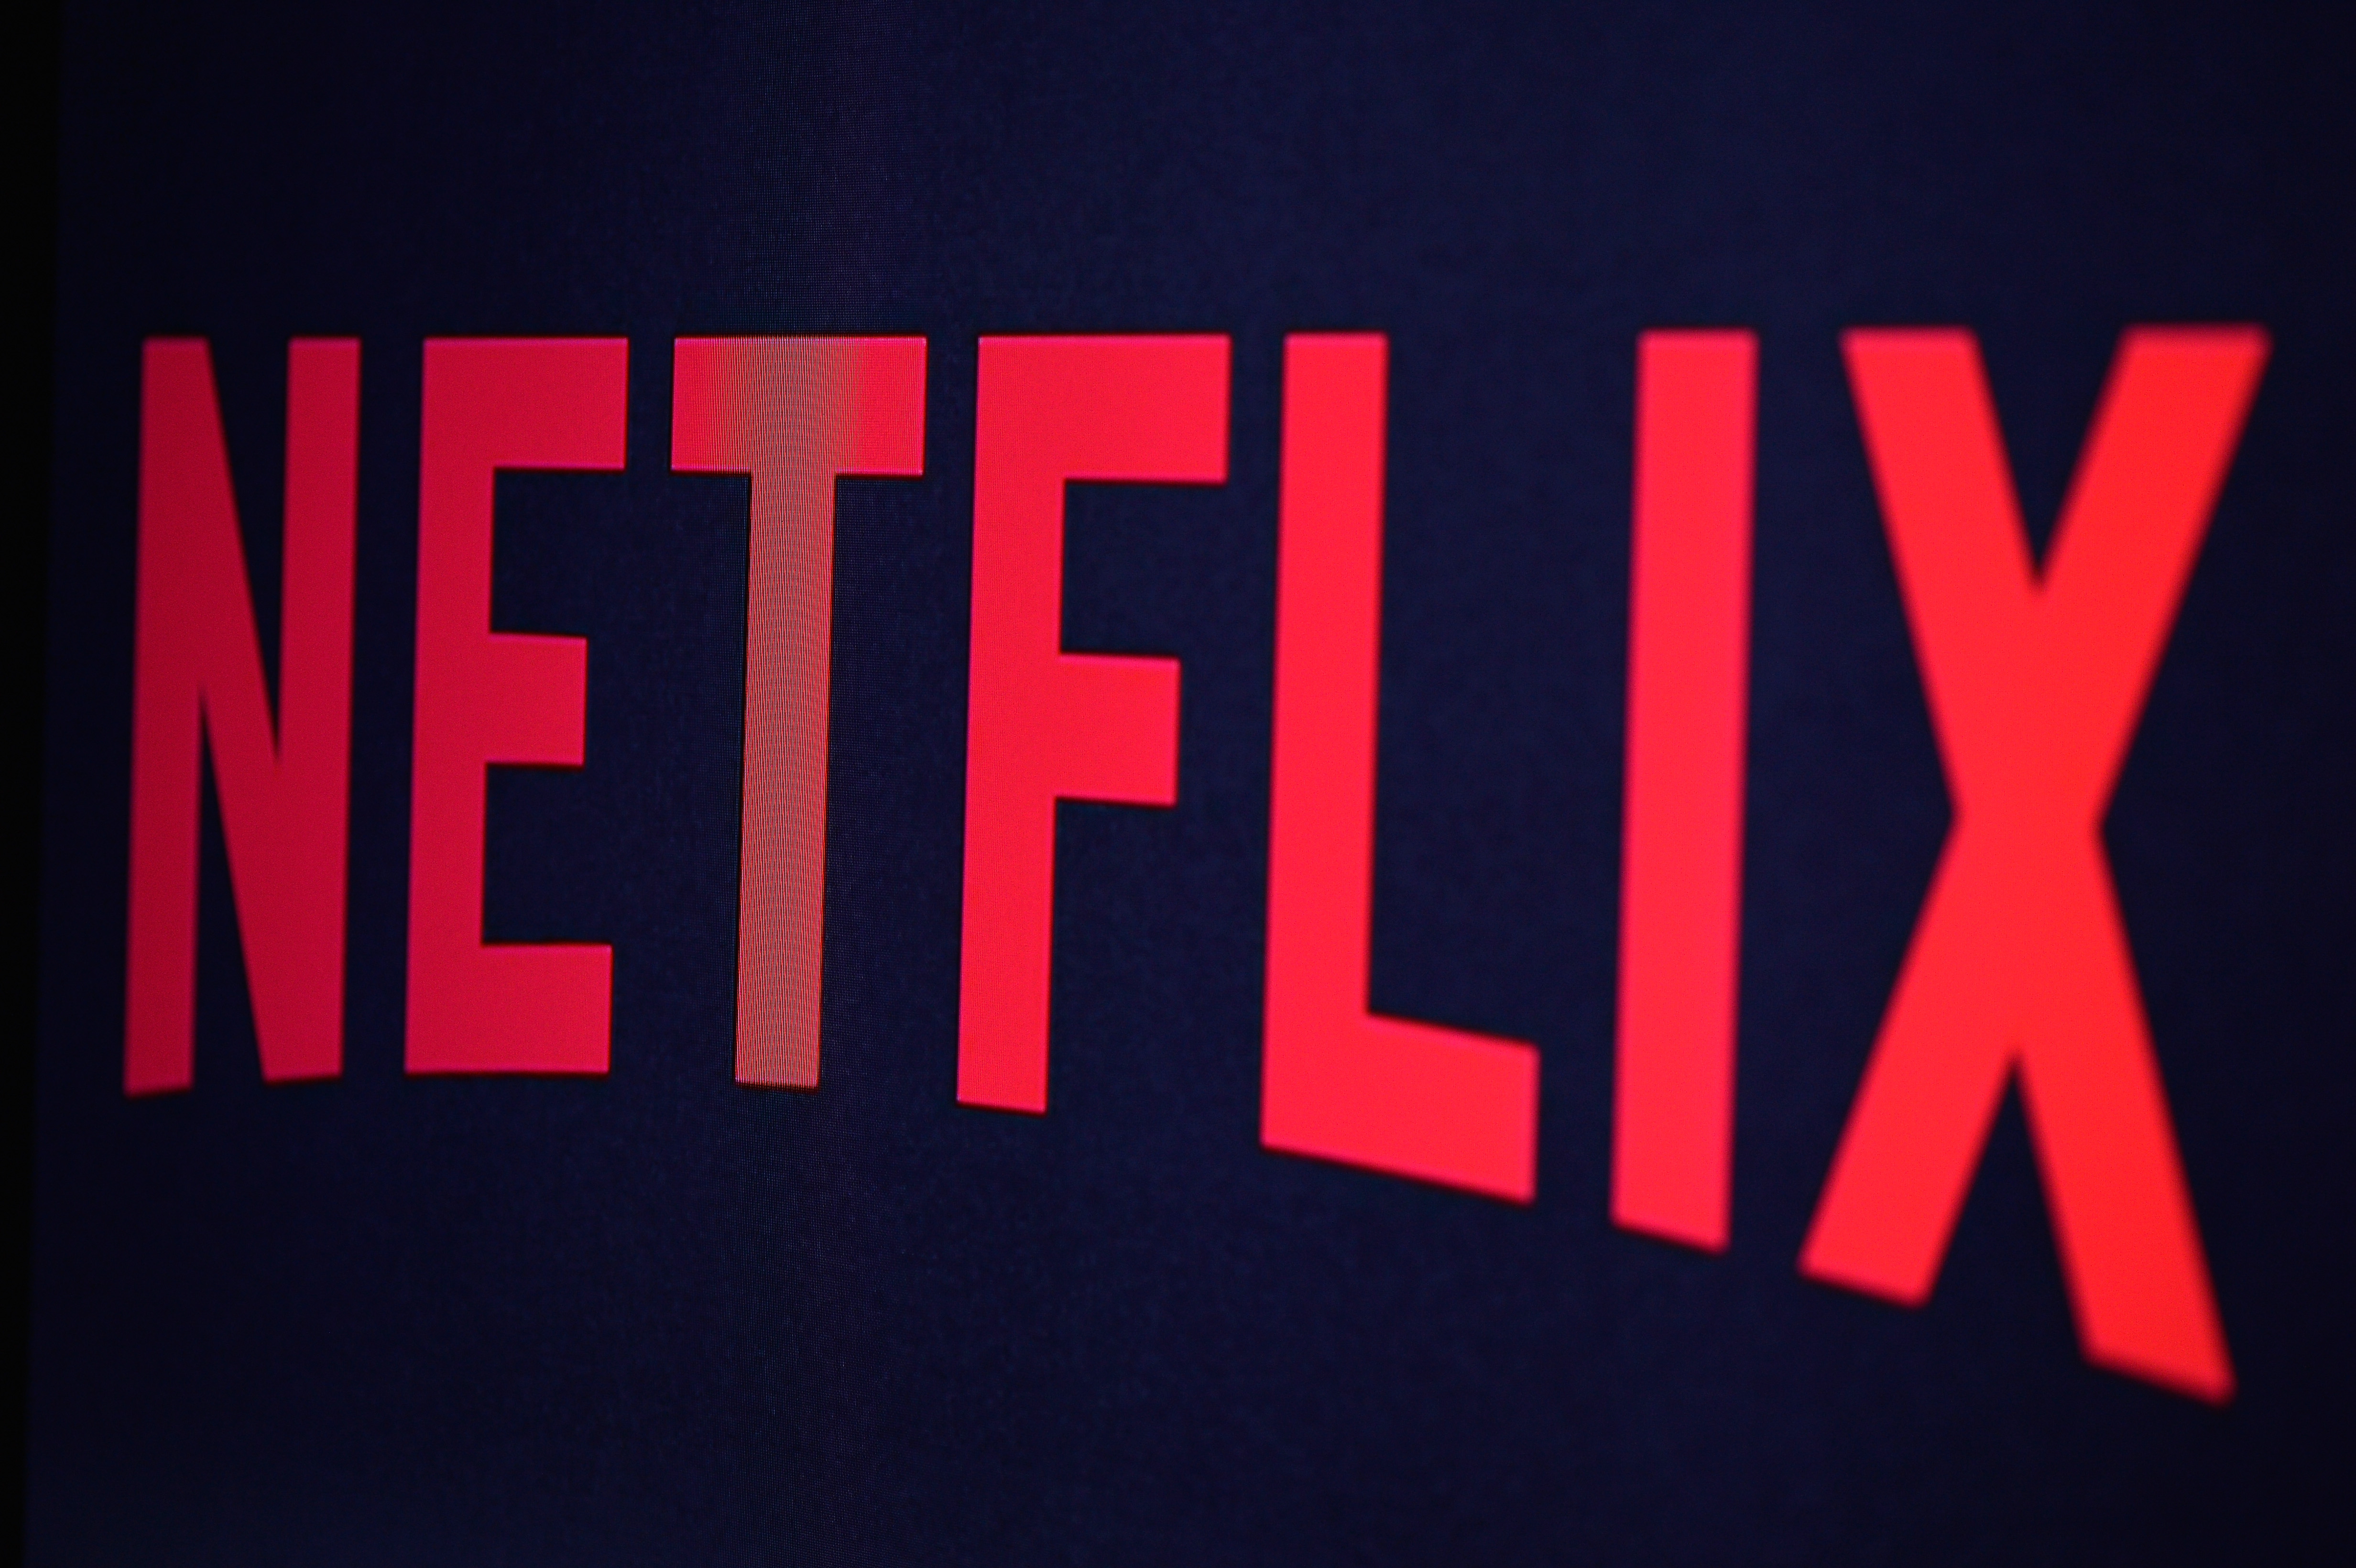 Netflix comments on speed control test controversy - Digital TV Europe